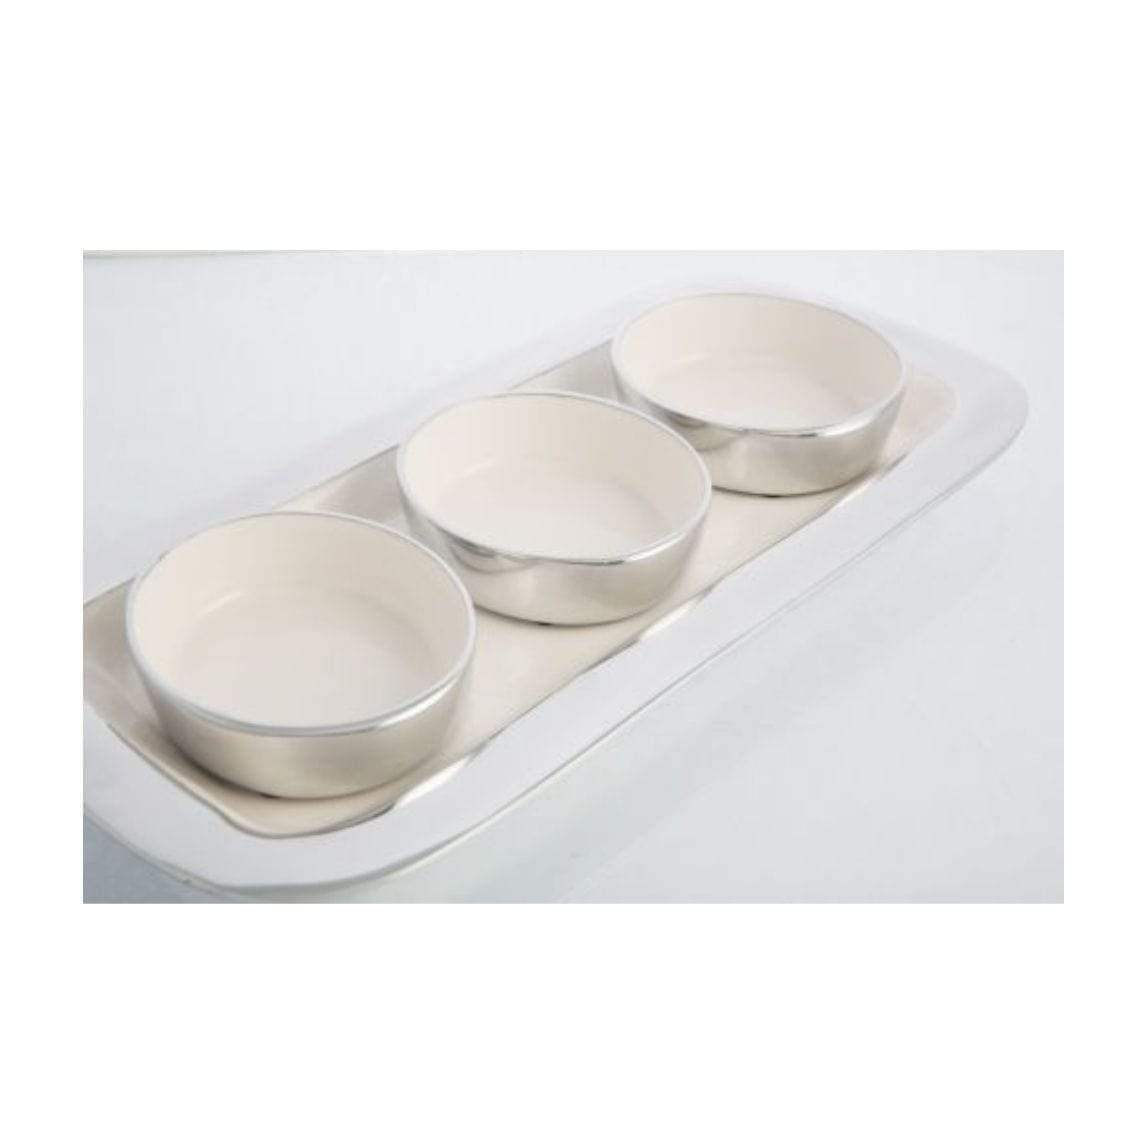 Three Aluminium / Enamel Condiment Bowls with Tray (Set of 3) by H&G Living on a white surface.